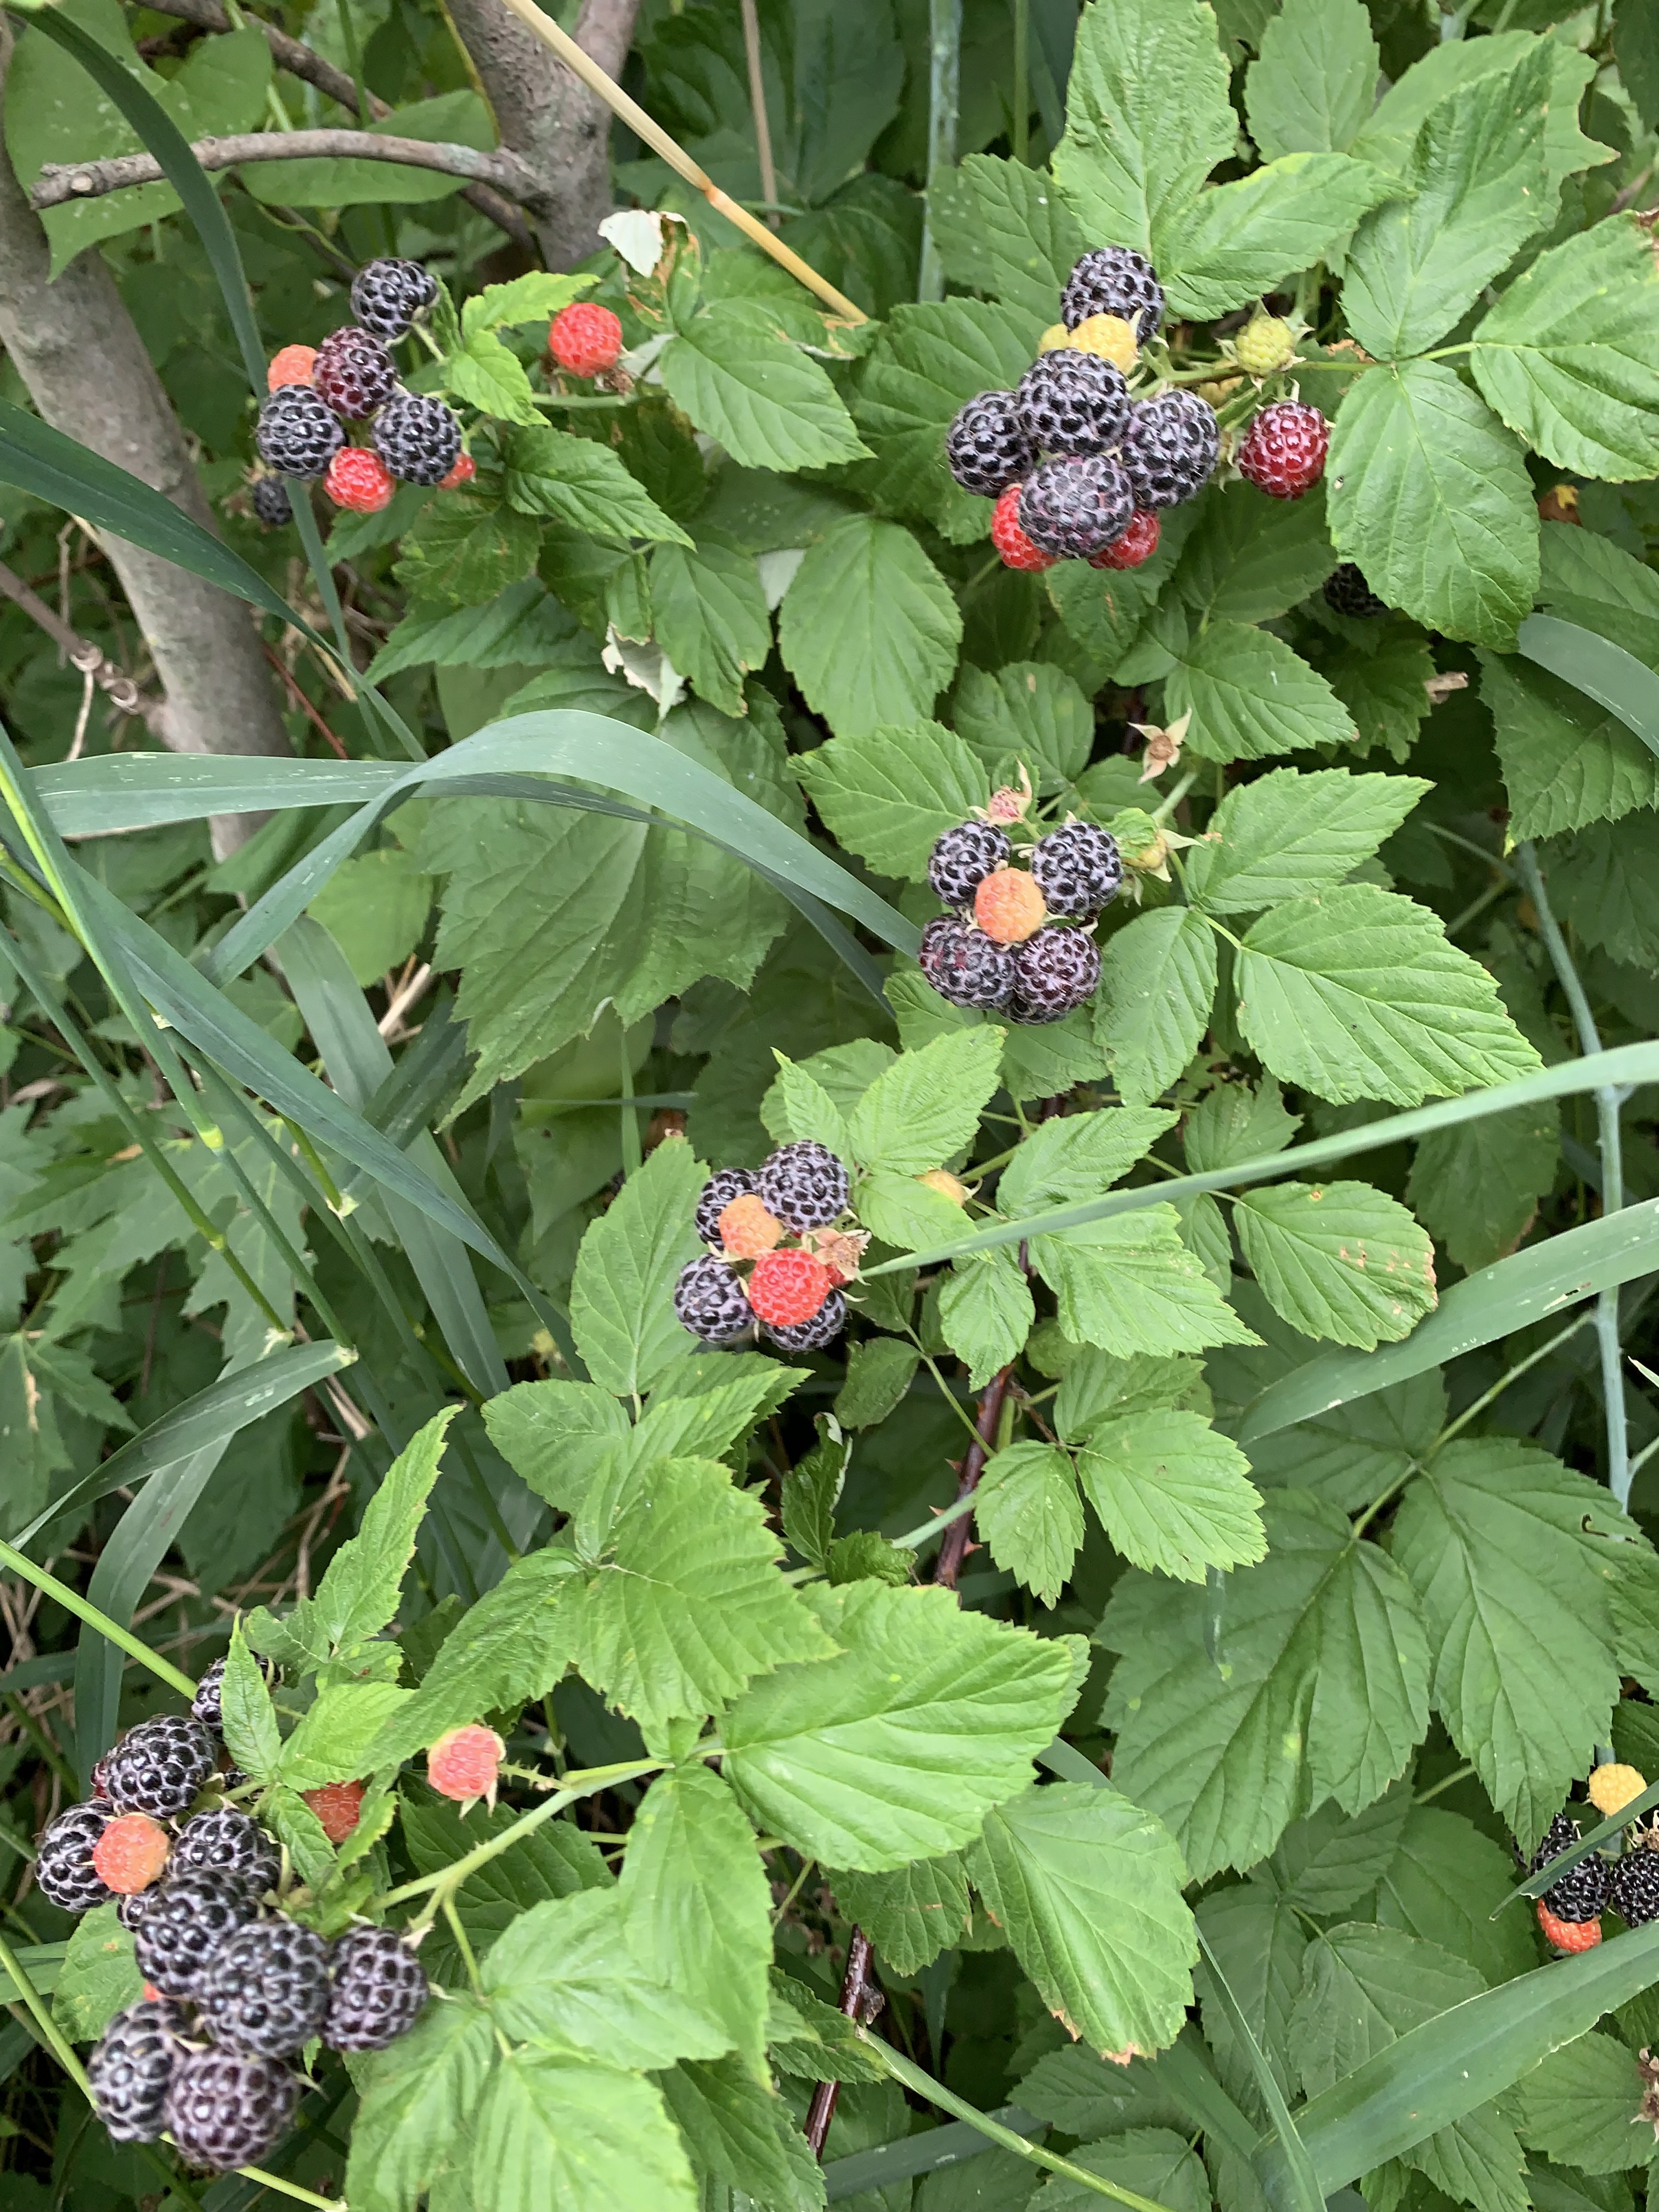 Clusters of 6-10 Black Raspberries spaced along the cane, amid dense, green foliage on the face of the fencerow thicket